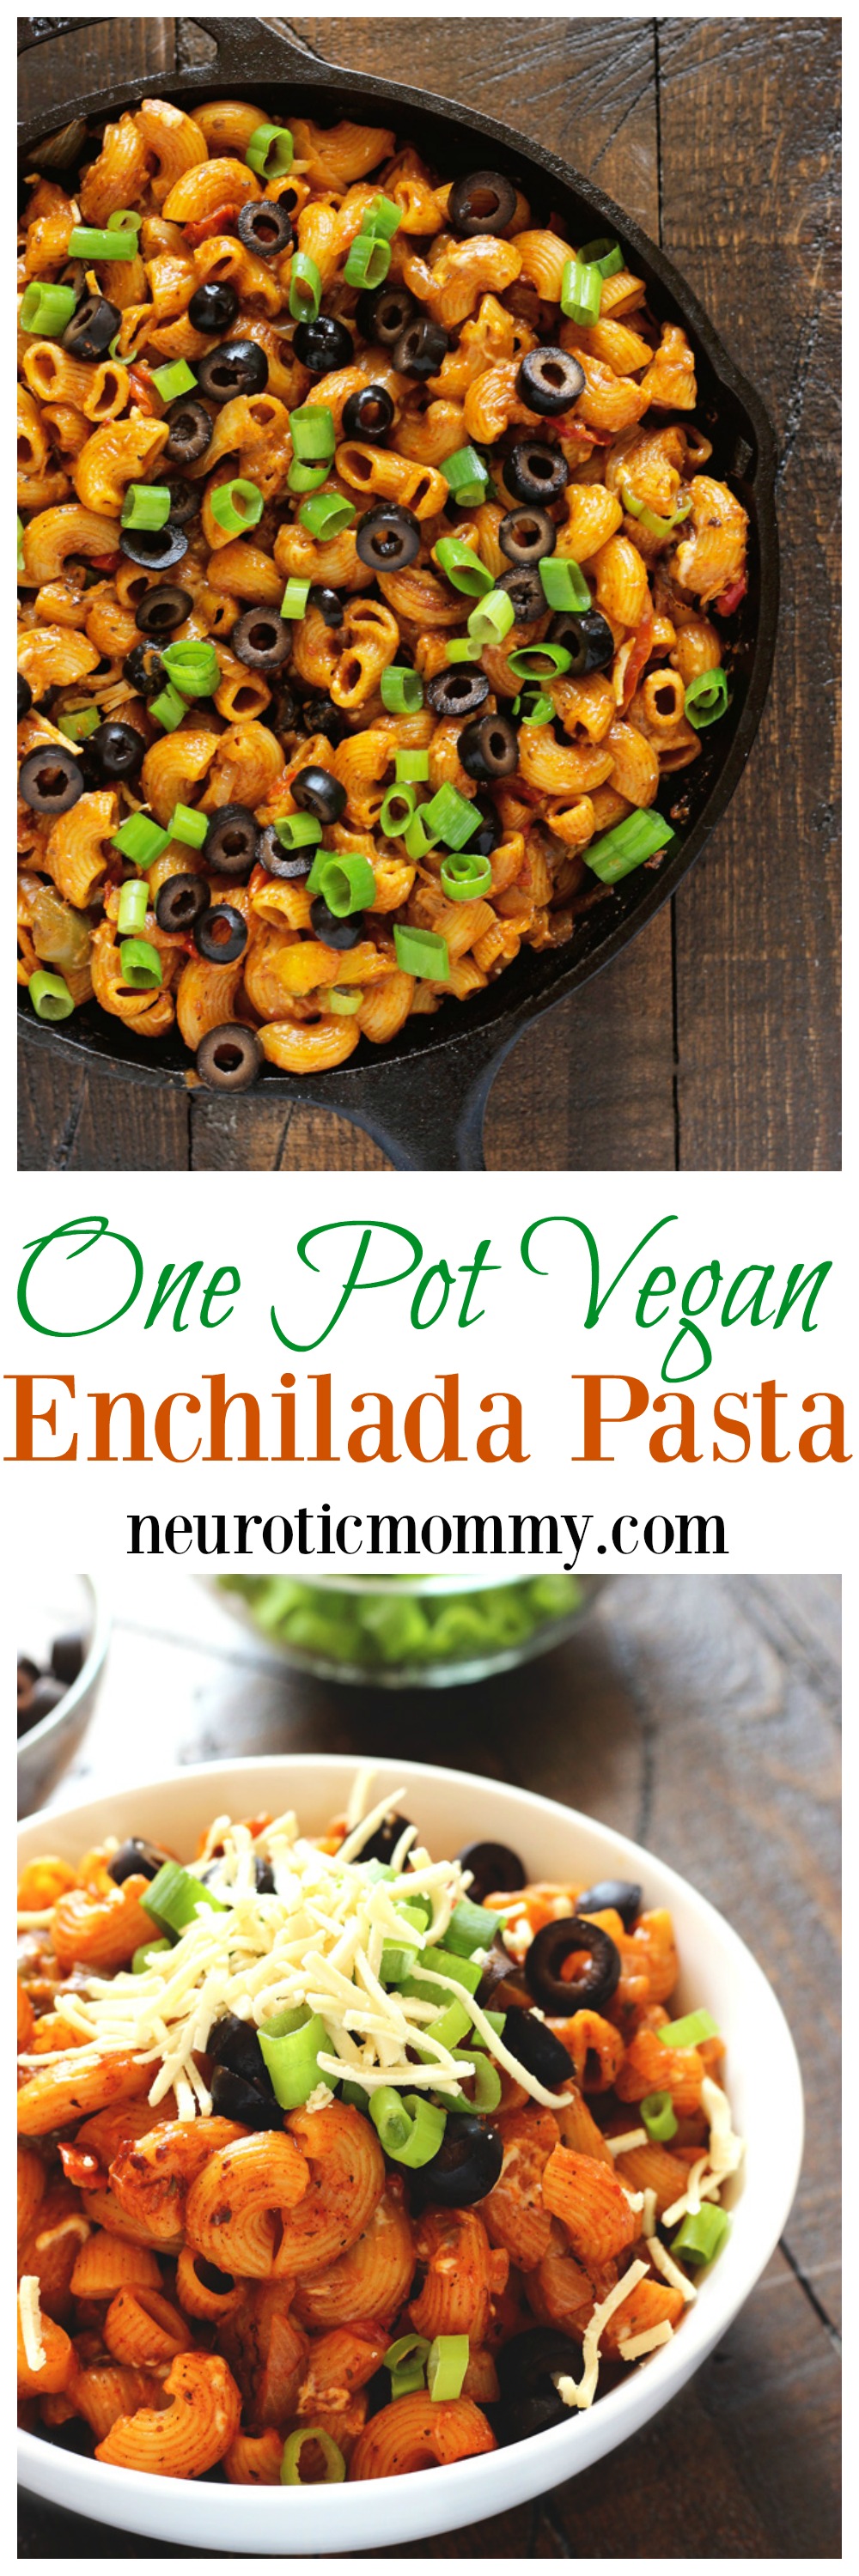 One Pot Vegan Enchilada Pasta - This go to weeknight dinner is perfect for healthy, quick, and easy. The melty vegan cheese, vegetables, and comfort of pasta are ready to eat in less than 20 minutes. NeuroticMommy.com #vegan #dinner #backtoschool